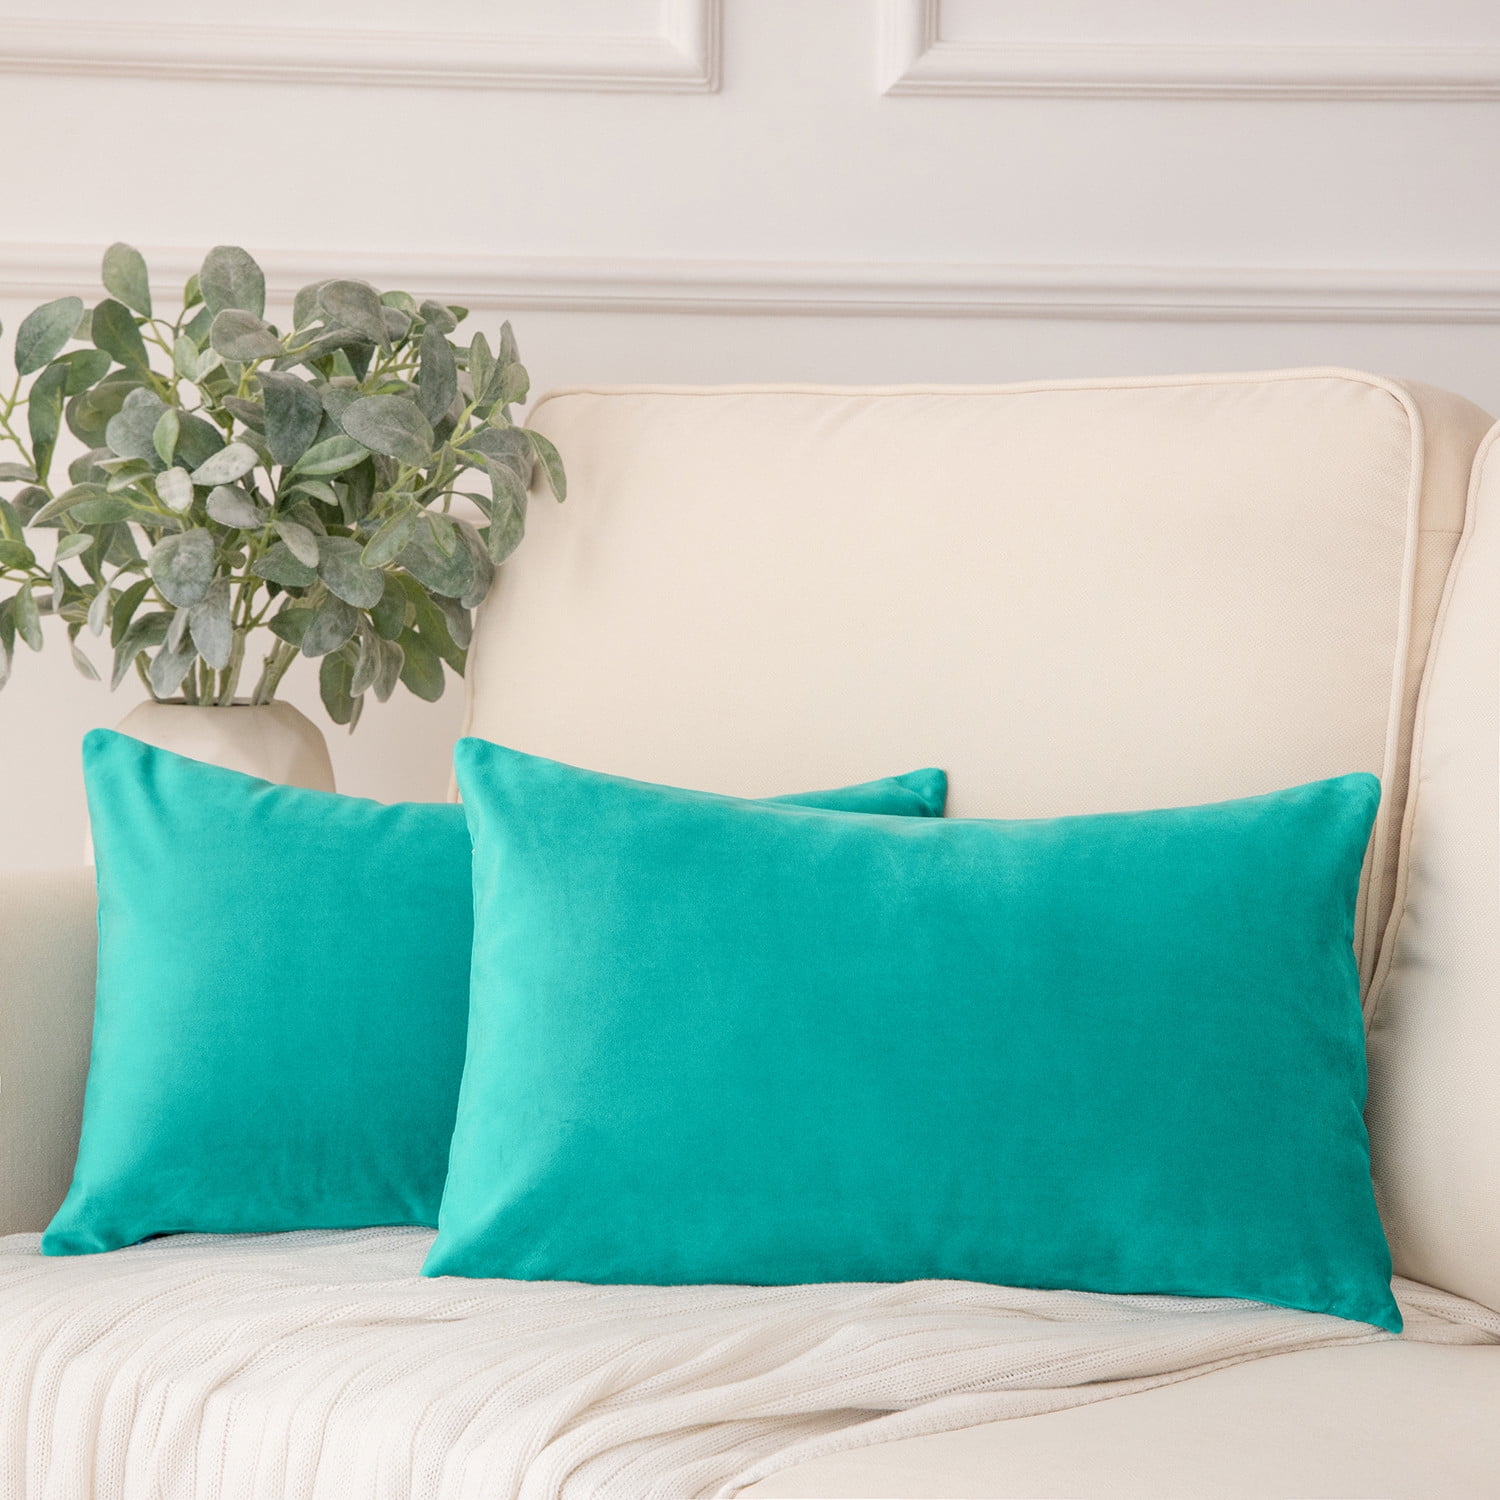 Olive and Turquoise Throw Pillow for Bed Decor Green Grey -    Turquoise throw pillows, Bed pillows decorative, Throw pillows bed